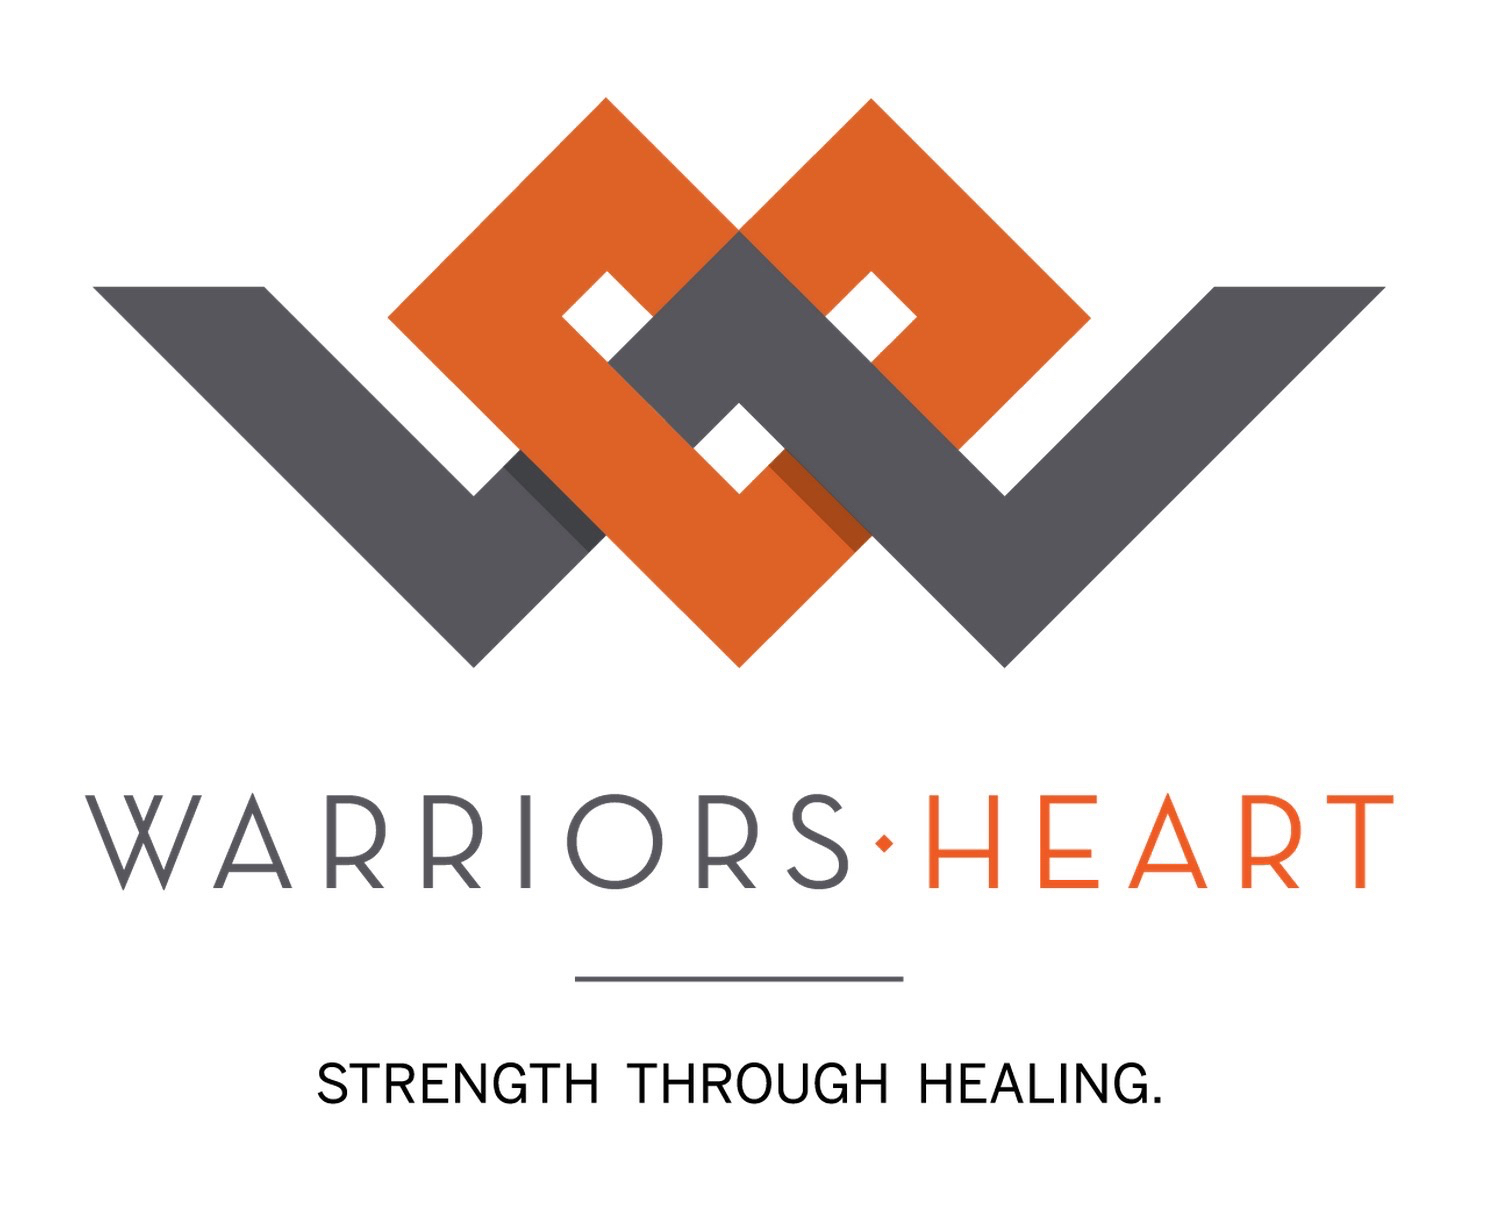 Warriors Heart Announces New Virginia Warrior Healing Center for Military, Veterans and First Responders struggling with Addiction, PTSD and Mental Health Issues